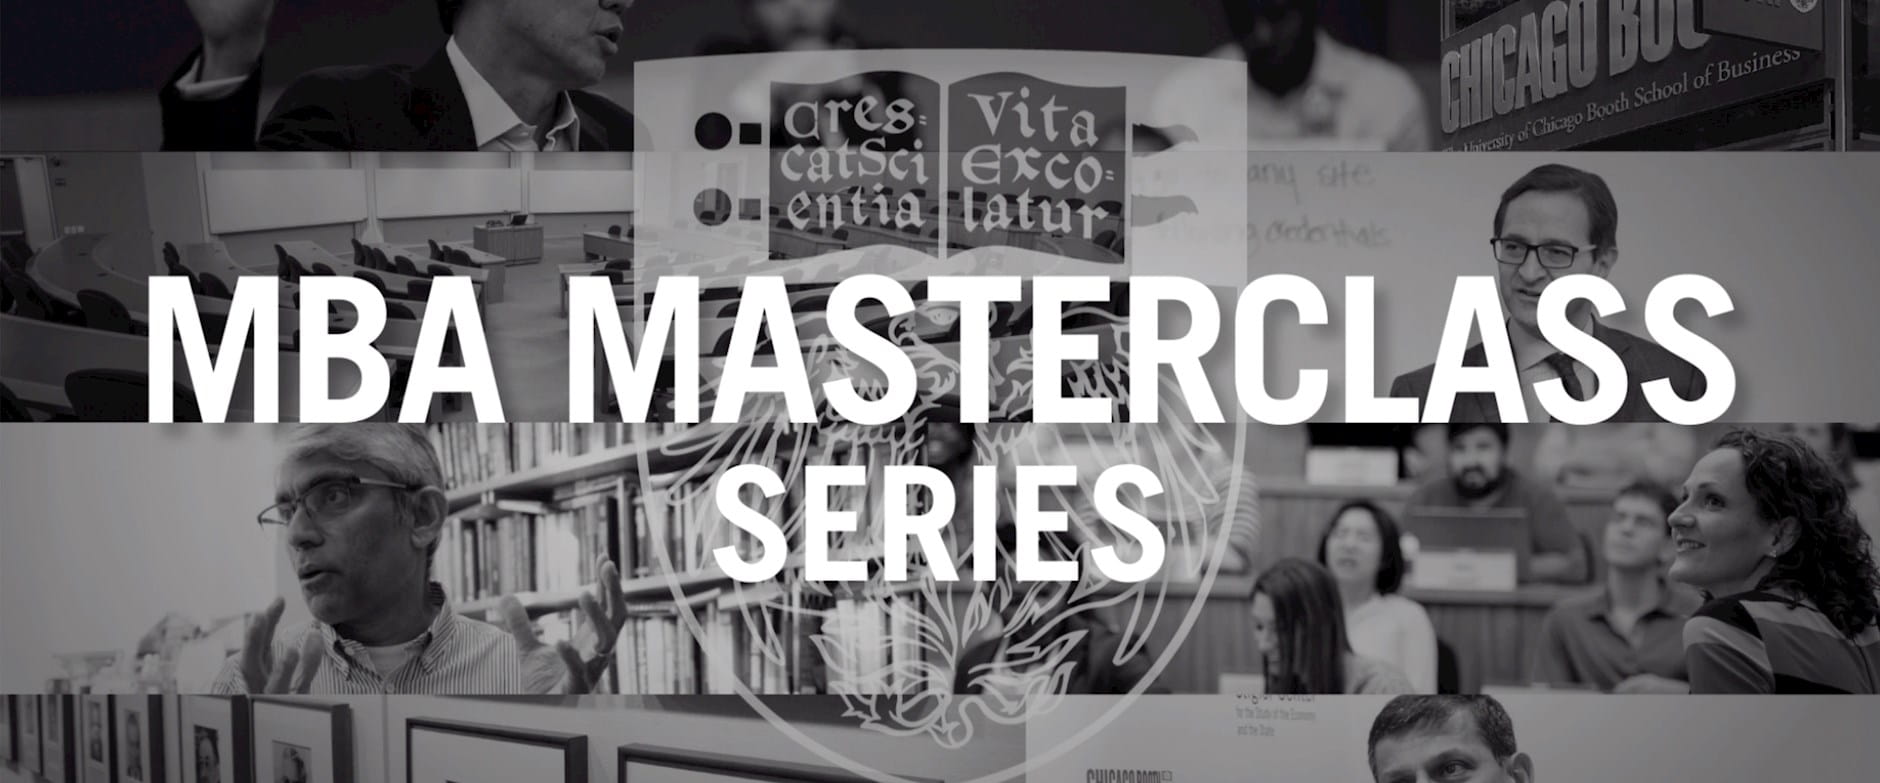 Chicago Booth MBA Masterclass Series Promo Video